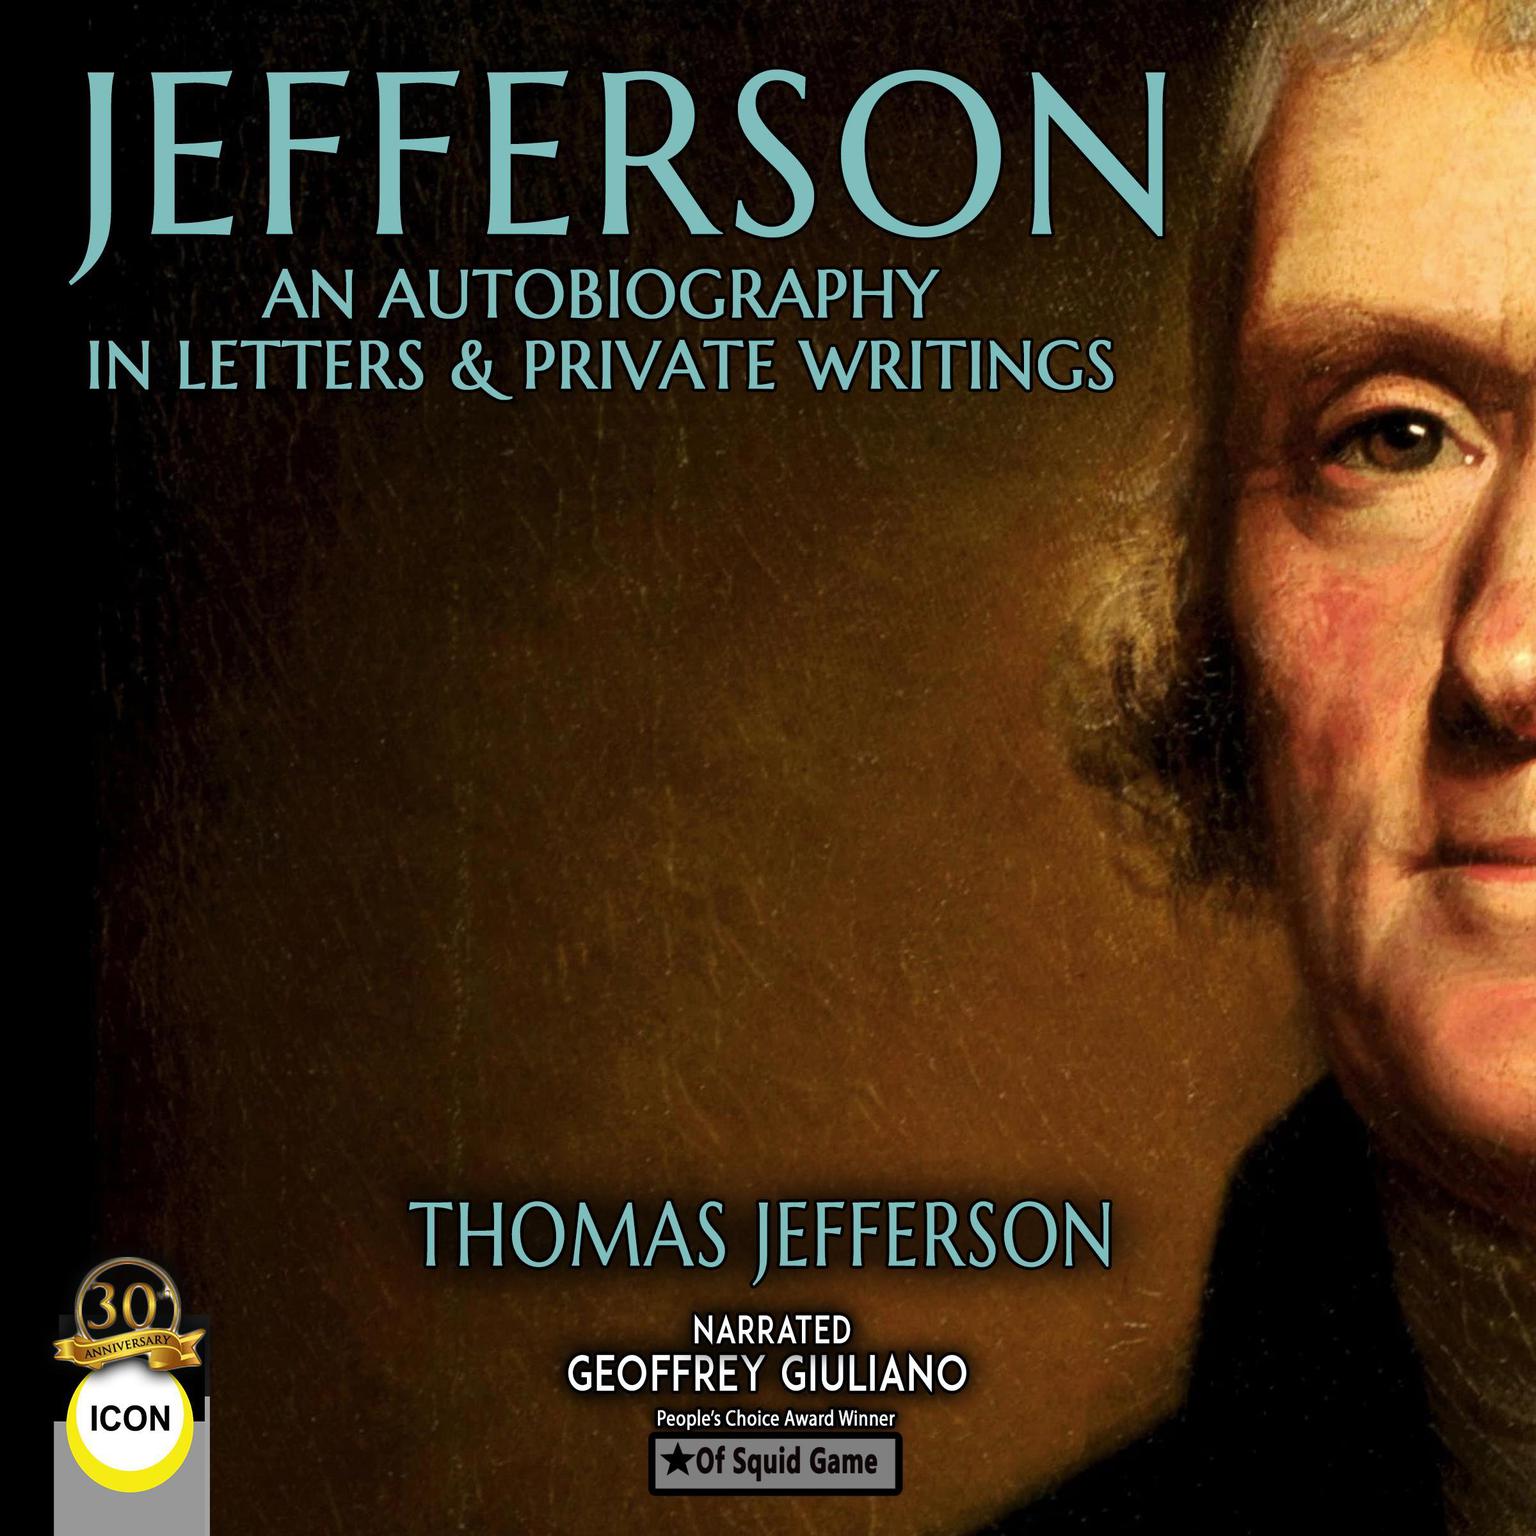 Jefferson An Autobiography In Letters & Private Writings (Abridged) Audiobook, by Thomas Jefferson